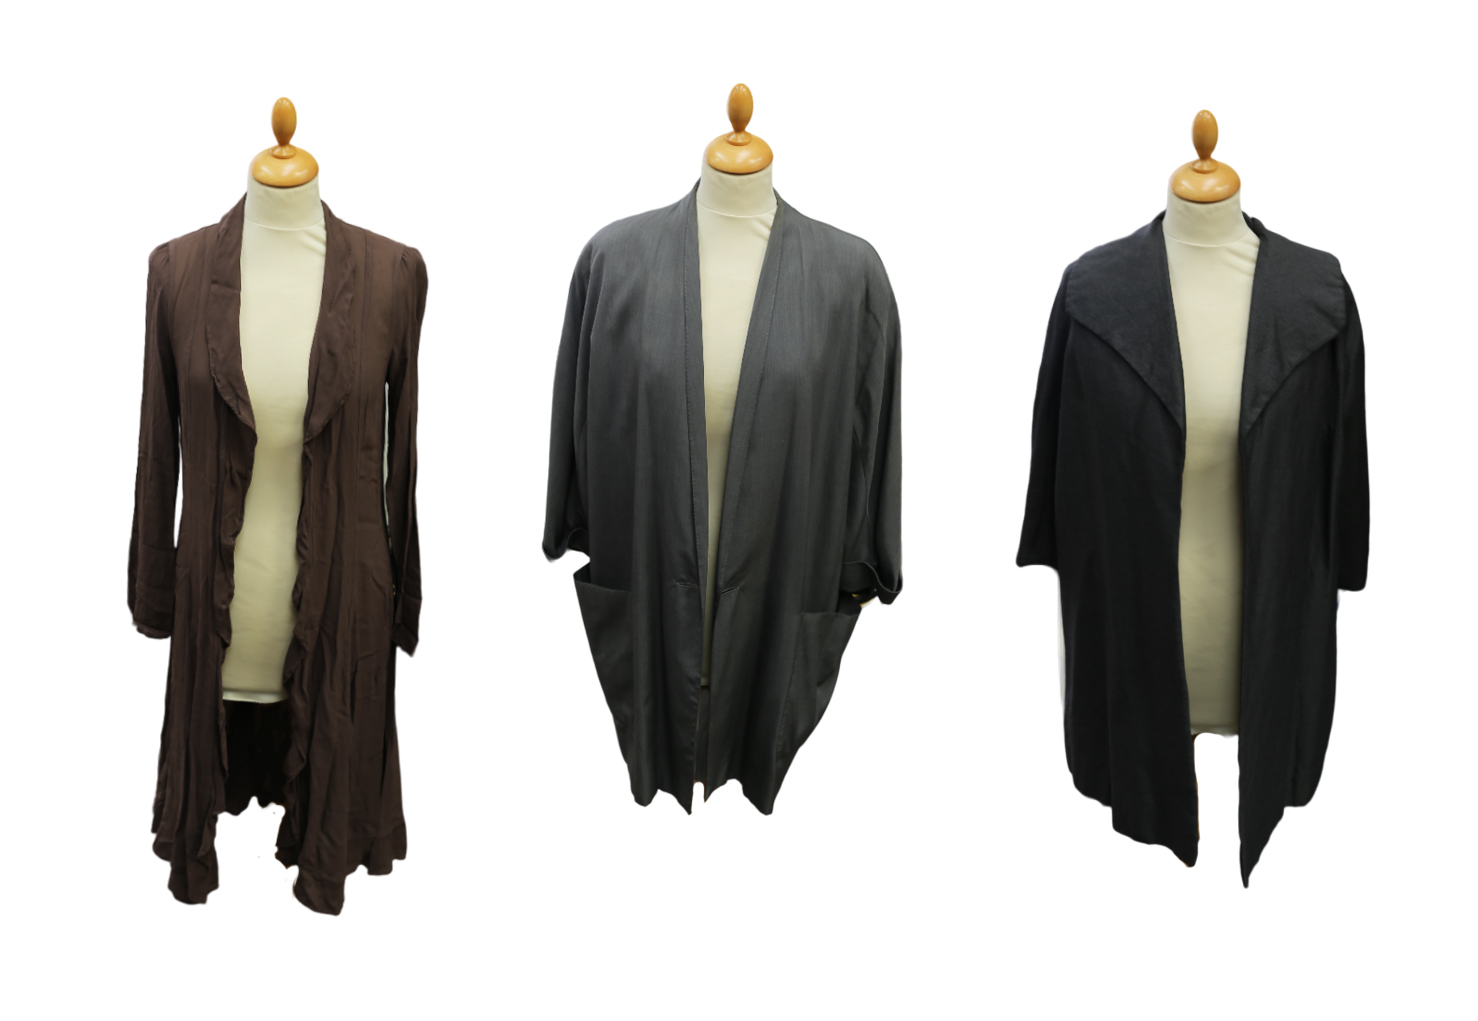 A Ghost summer-weight coat, size small, in mushroom-coloured crepe-type fabric, waterfall design